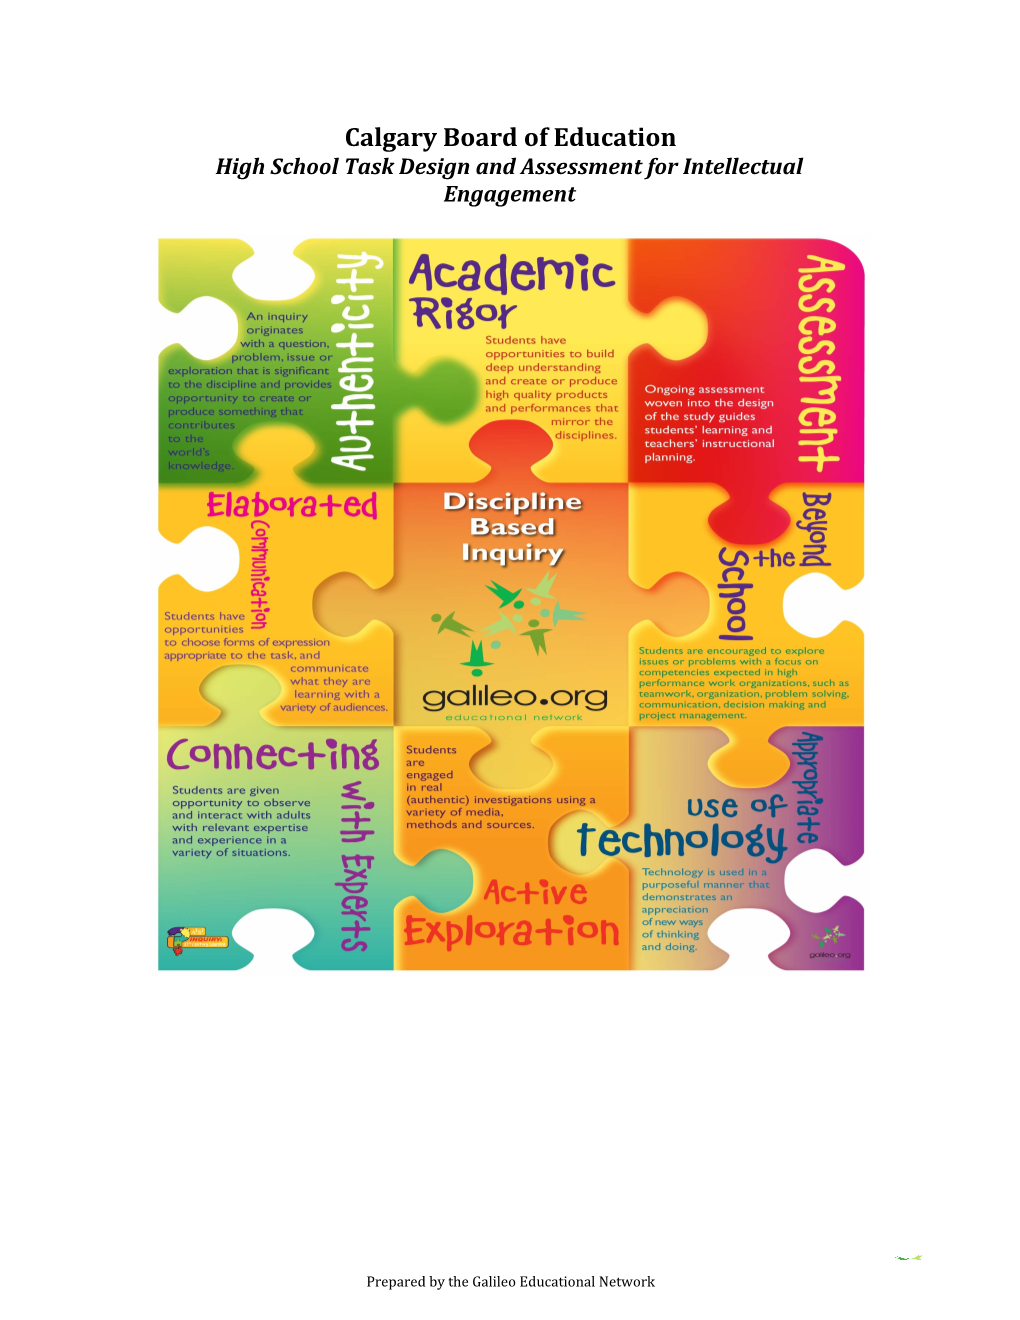 High School Task Design and Assessment for Intellectual Engagement